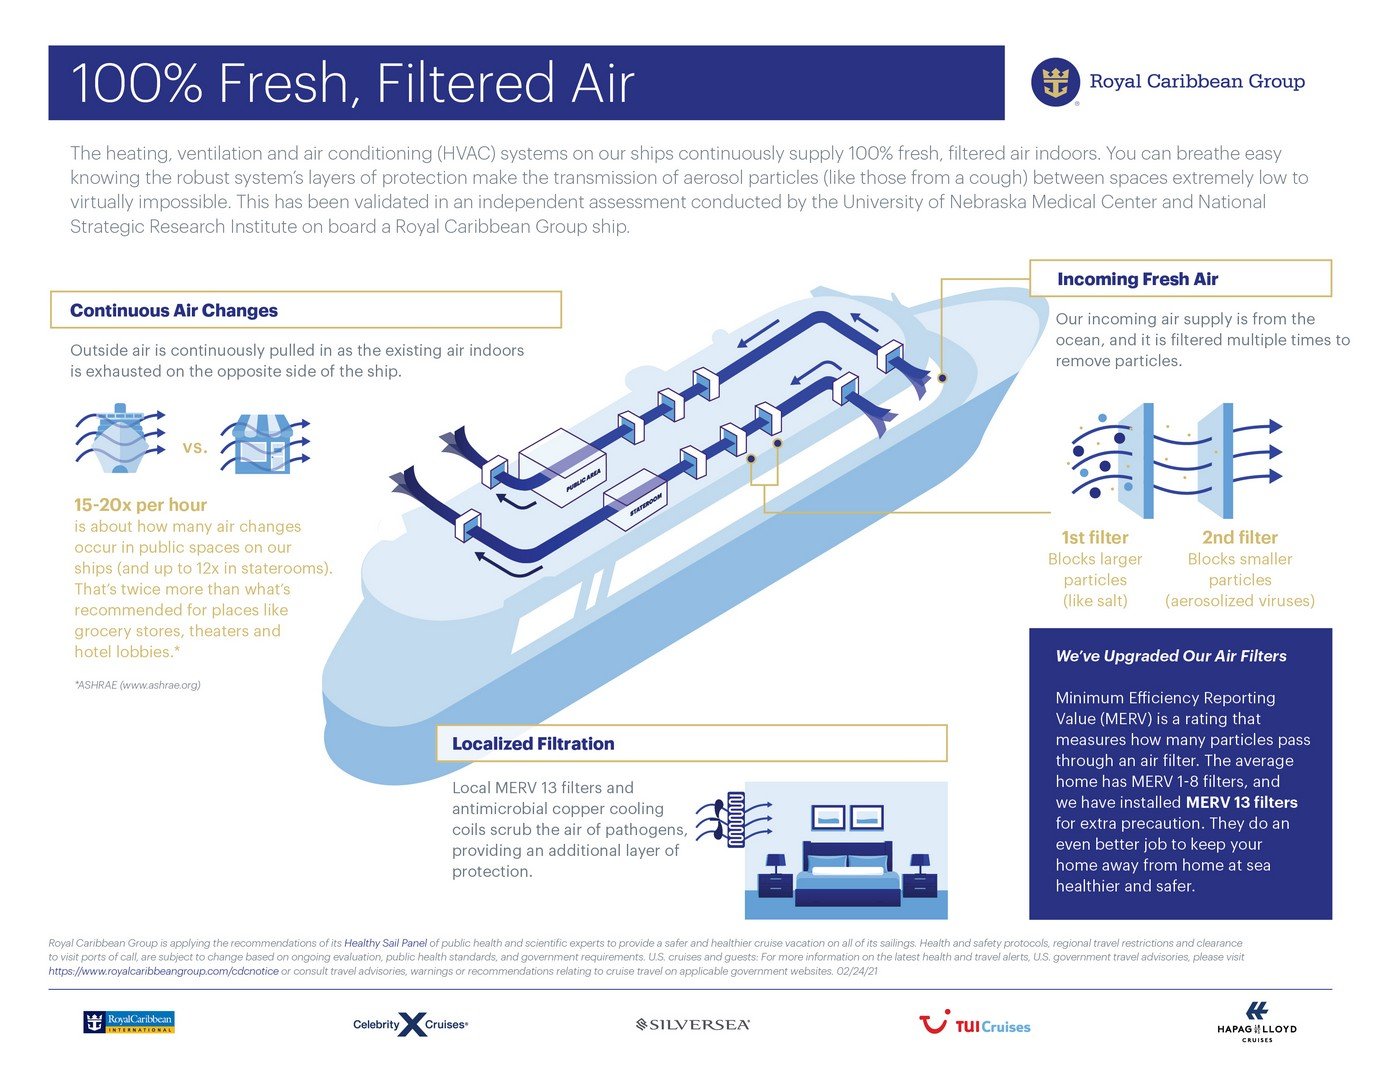 A new study shows "exceptionally low"  Risk of Airborne Particles on Cruise Ships |  Royal Caribbean Blog